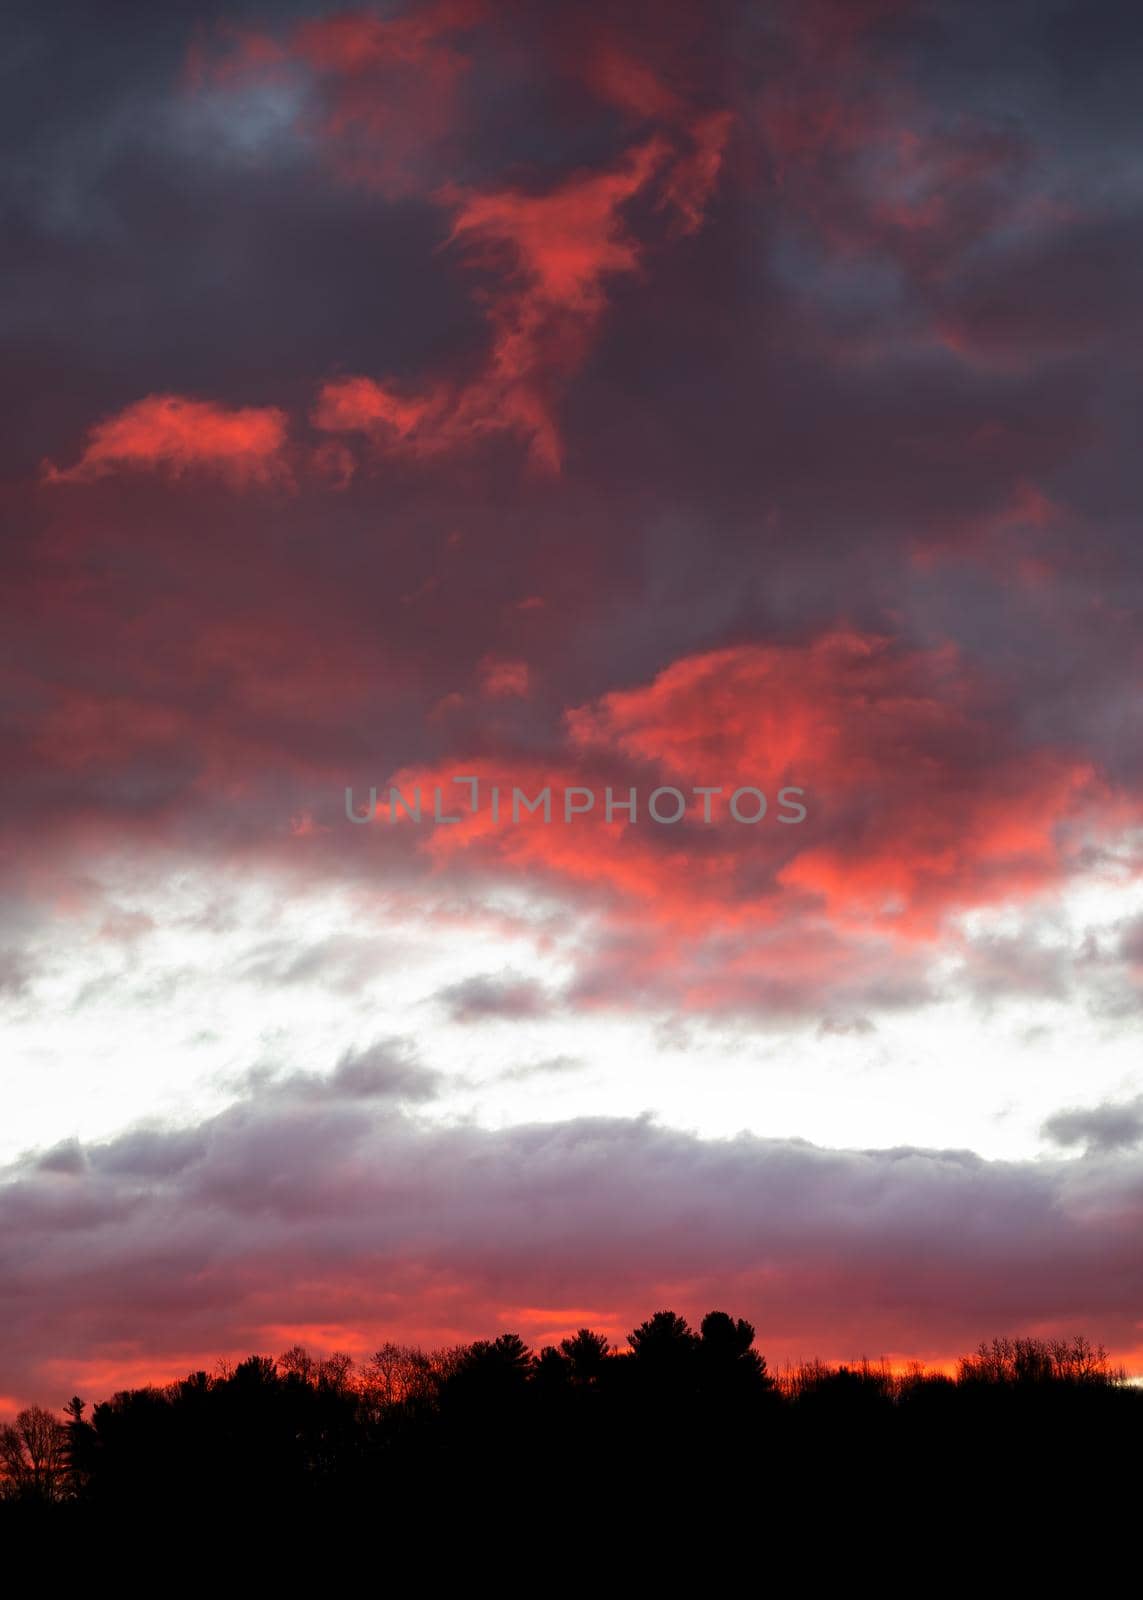 Fire in the Morning Sky by CharlieFloyd